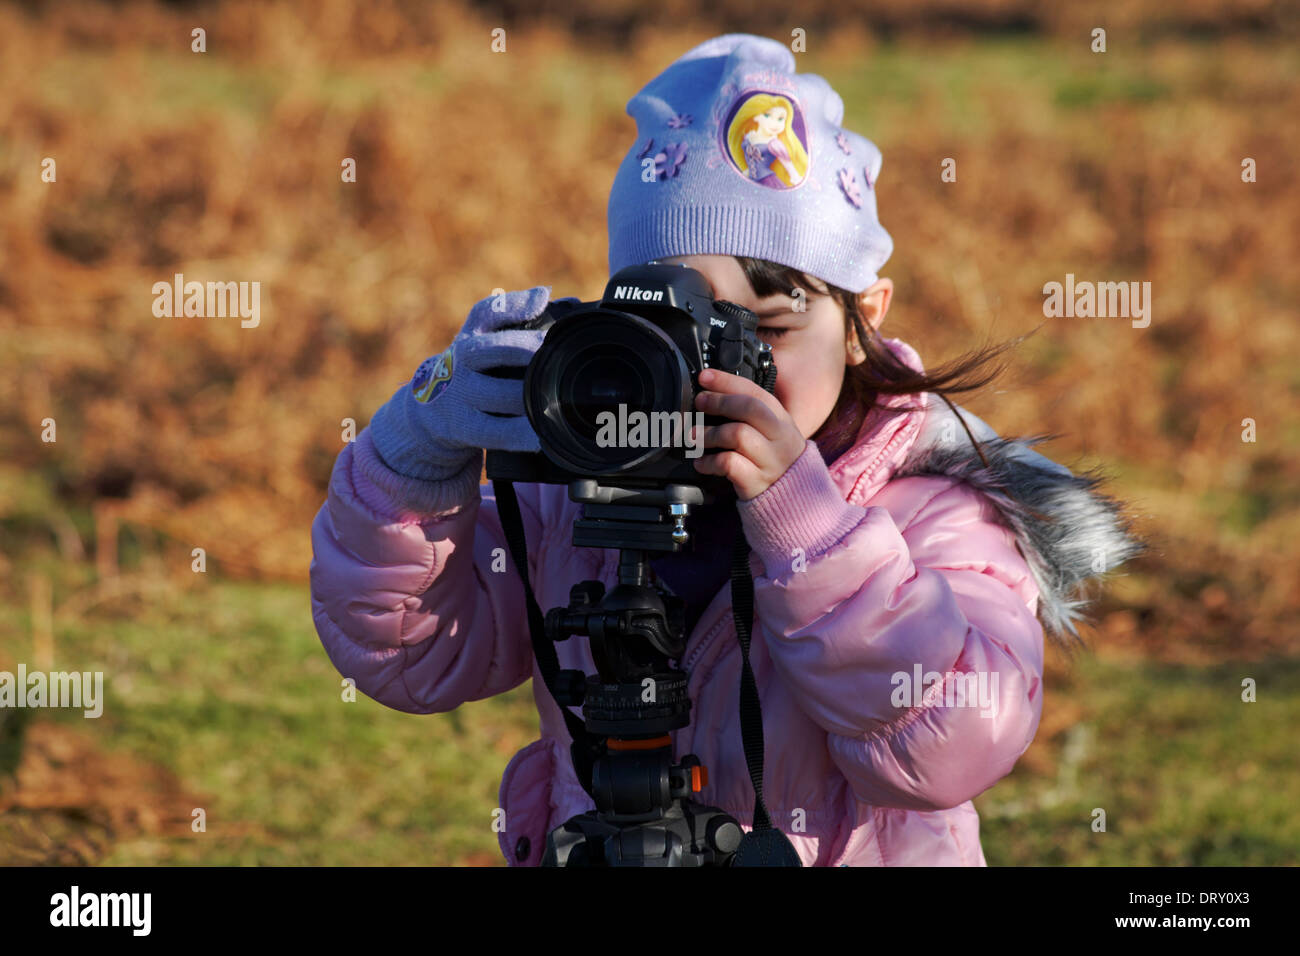 smile - young photographer, young girl taking a photo with Nikon D800 camera on Acratech tripod Stock Photo